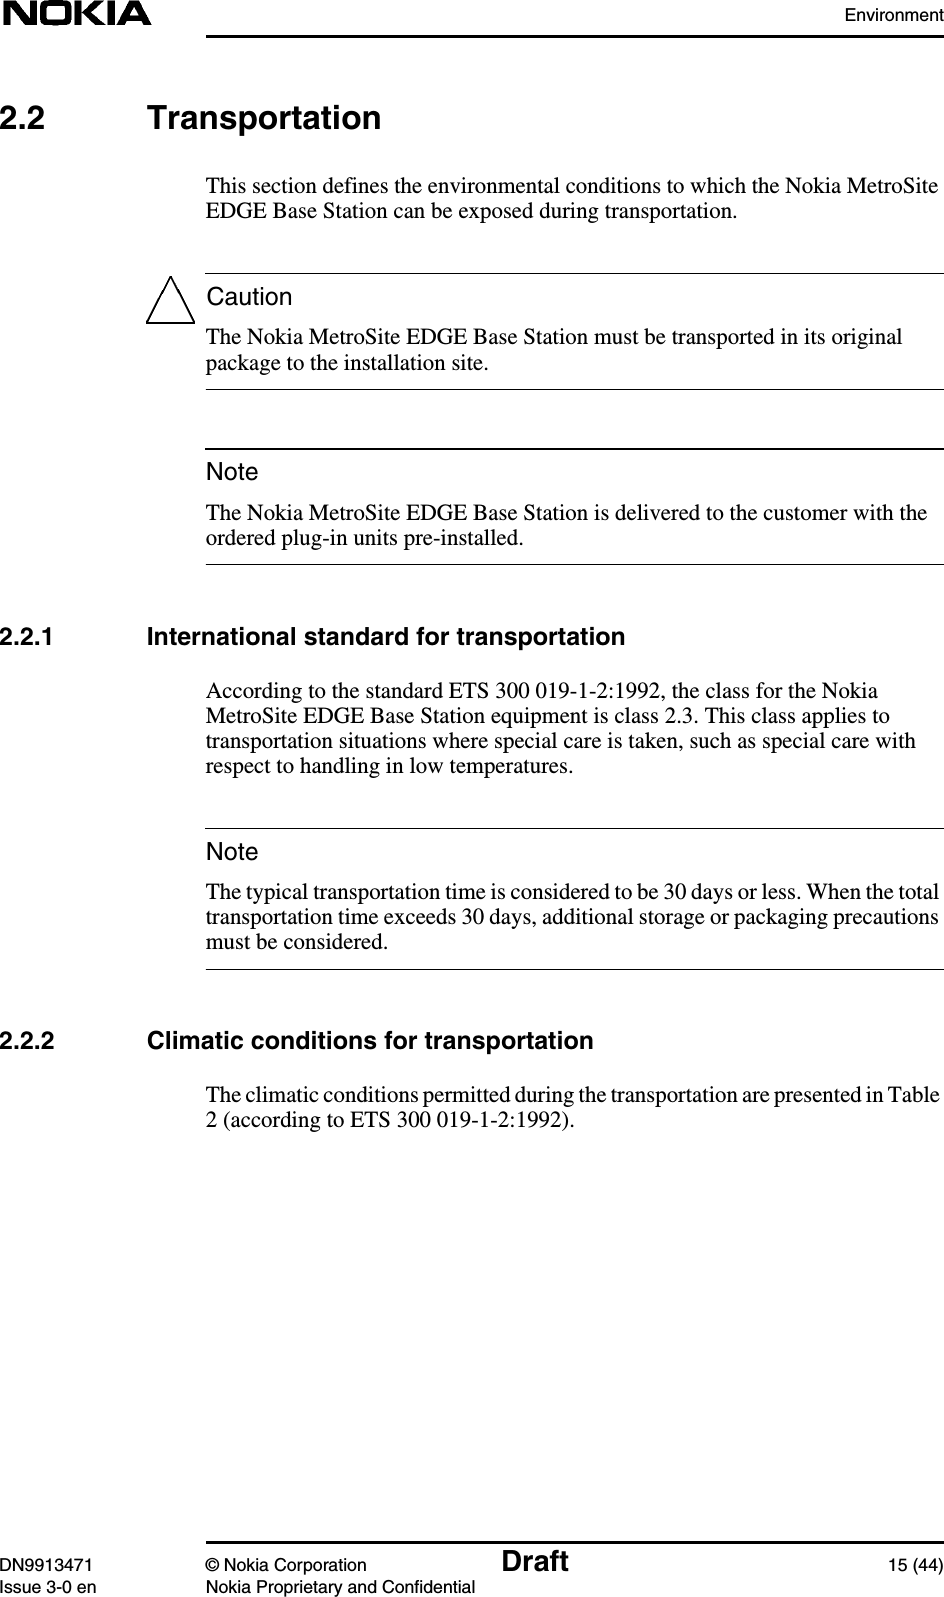 EnvironmentDN9913471 © Nokia Corporation Draft 15 (44)Issue 3-0 en Nokia Proprietary and ConfidentialCautionNoteNote2.2 TransportationThis section defines the environmental conditions to which the Nokia MetroSiteEDGE Base Station can be exposed during transportation.The Nokia MetroSite EDGE Base Station must be transported in its originalpackage to the installation site.The Nokia MetroSite EDGE Base Station is delivered to the customer with theordered plug-in units pre-installed.2.2.1 International standard for transportationAccording to the standard ETS 300 019-1-2:1992, the class for the NokiaMetroSite EDGE Base Station equipment is class 2.3. This class applies totransportation situations where special care is taken, such as special care withrespect to handling in low temperatures.The typical transportation time is considered to be 30 days or less. When the totaltransportation time exceeds 30 days, additional storage or packaging precautionsmust be considered.2.2.2 Climatic conditions for transportationThe climatic conditions permitted during the transportation are presented in Table2 (according to ETS 300 019-1-2:1992).